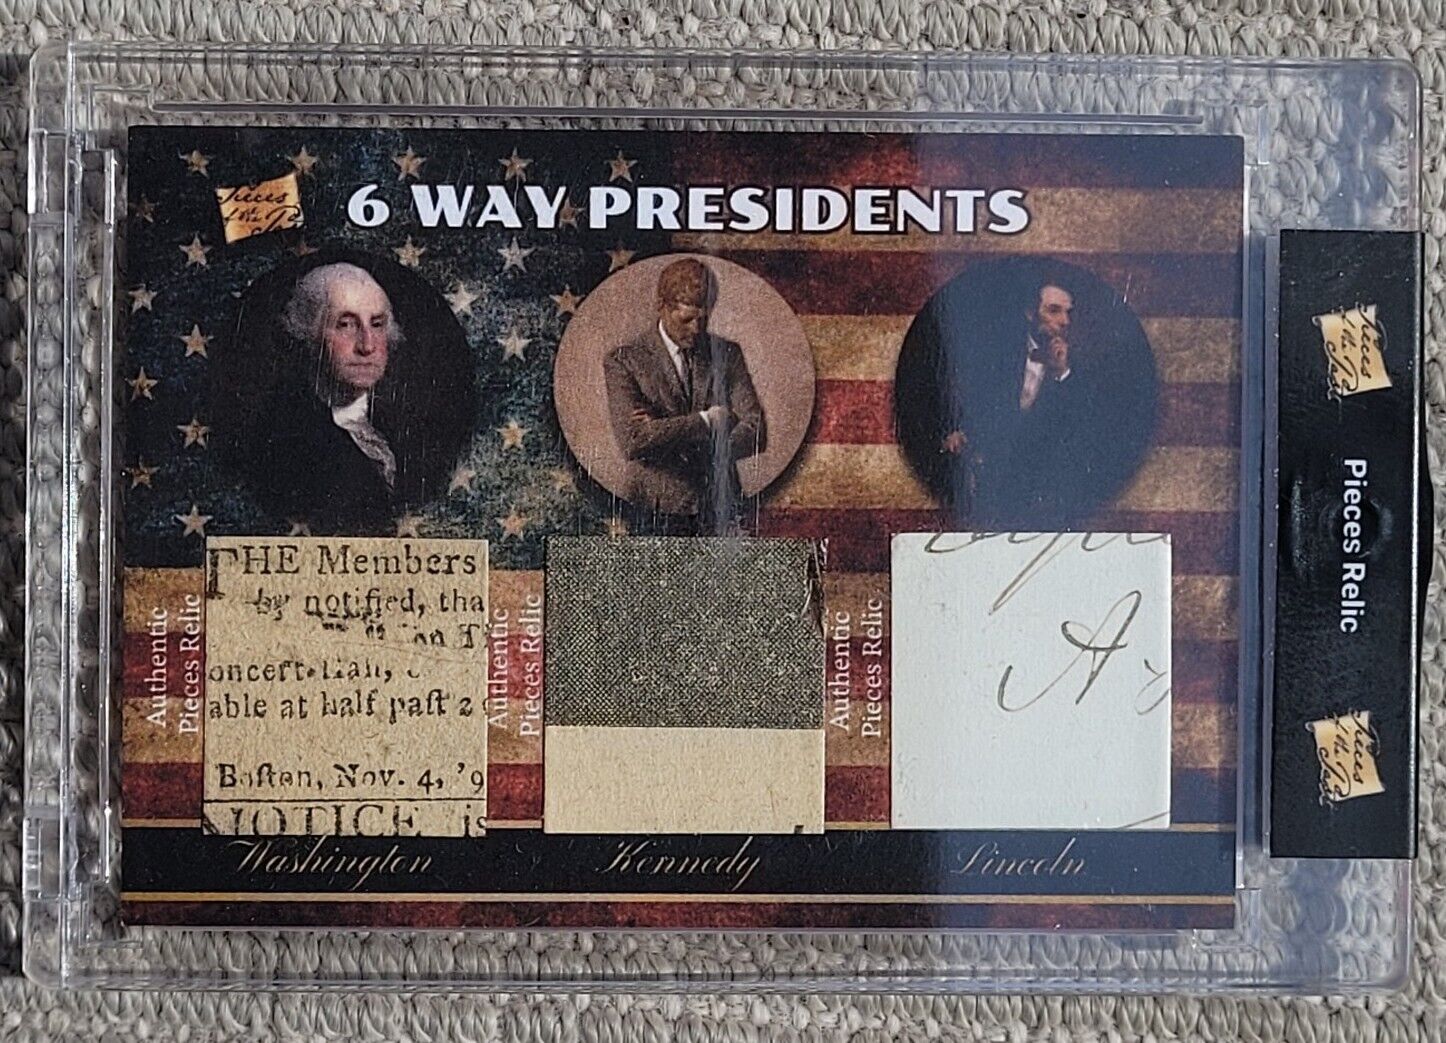 2022 Pieces Of The Past -- 6 WAY PRESIDENTS -- Pieces Relic